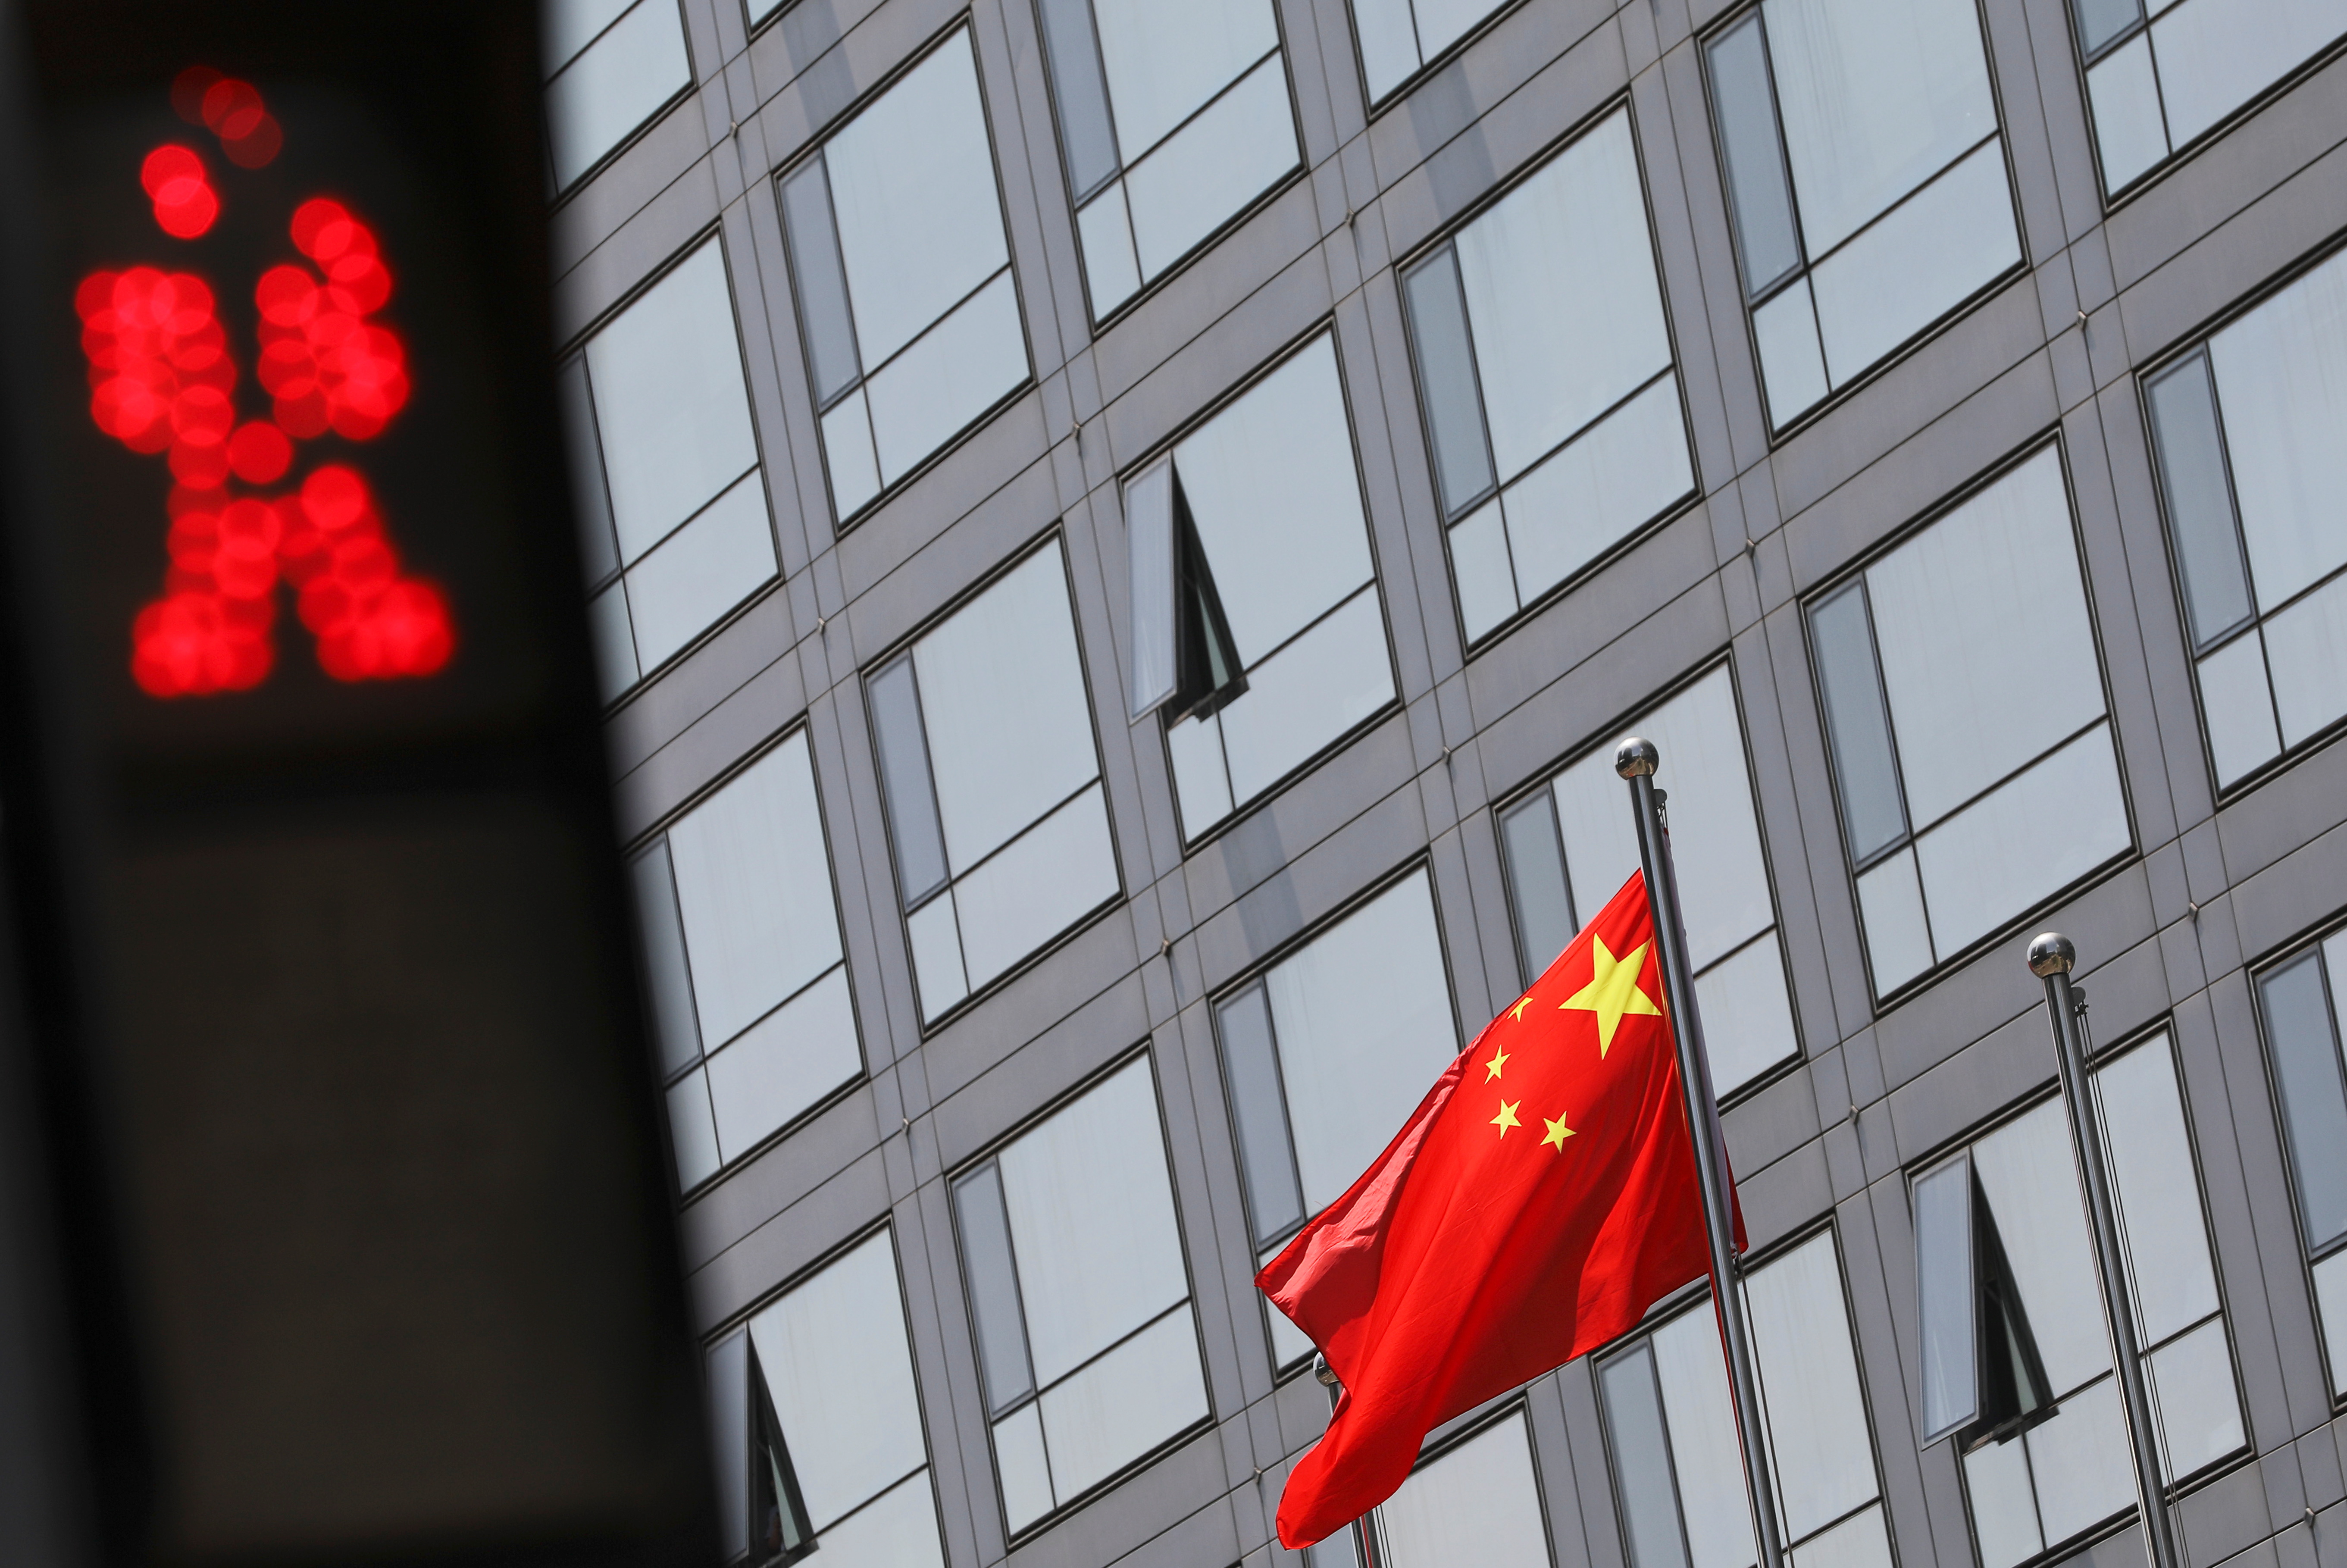 A Chinese national flag flutters outside the China Securities Regulatory Commission (CSRC) building on the Financial Street in Beijing, China July 9, 2021. REUTERS/Tingshu Wang